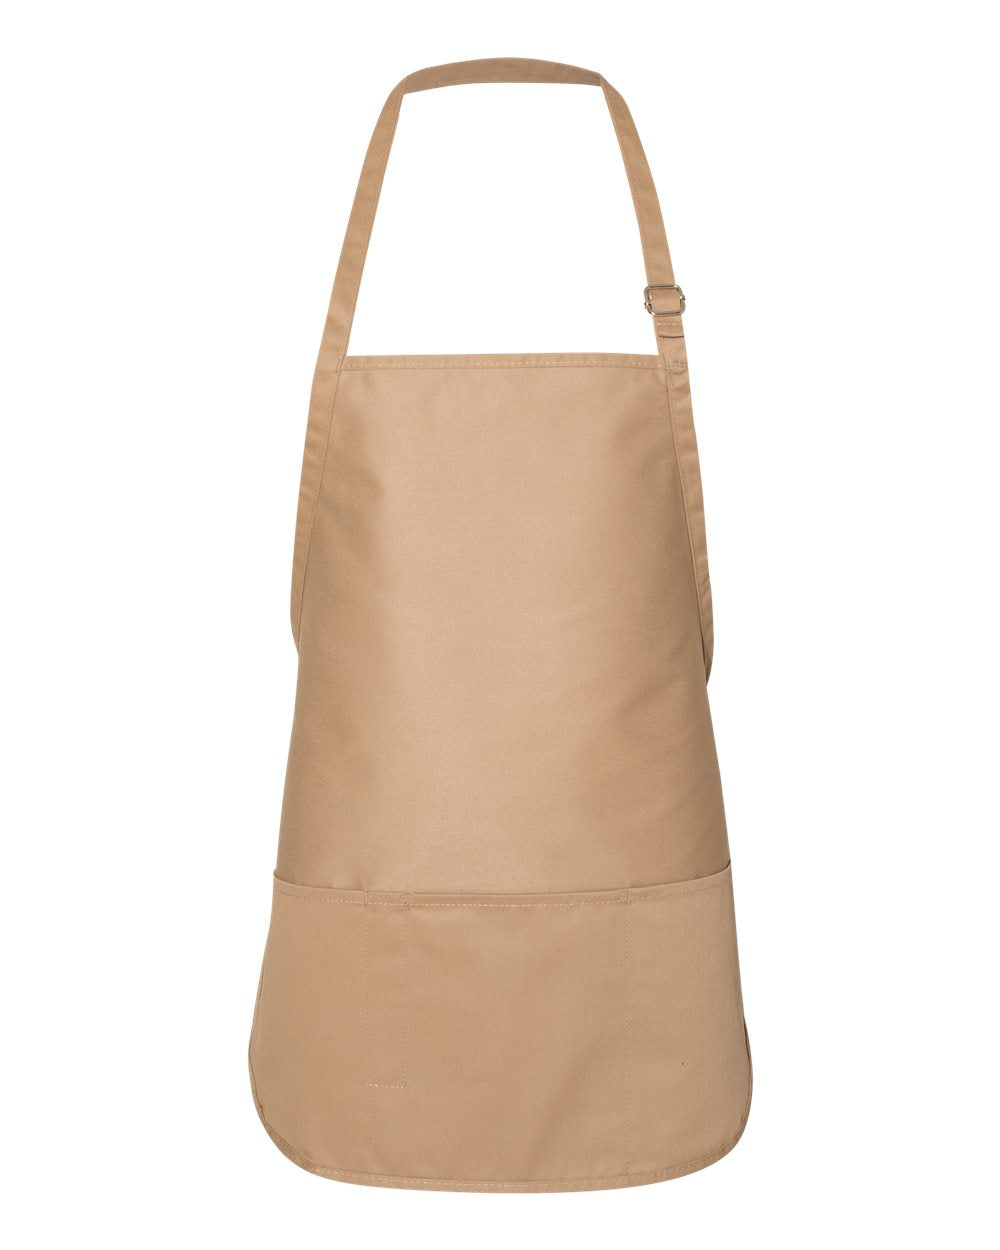 Apron with adjustable neck